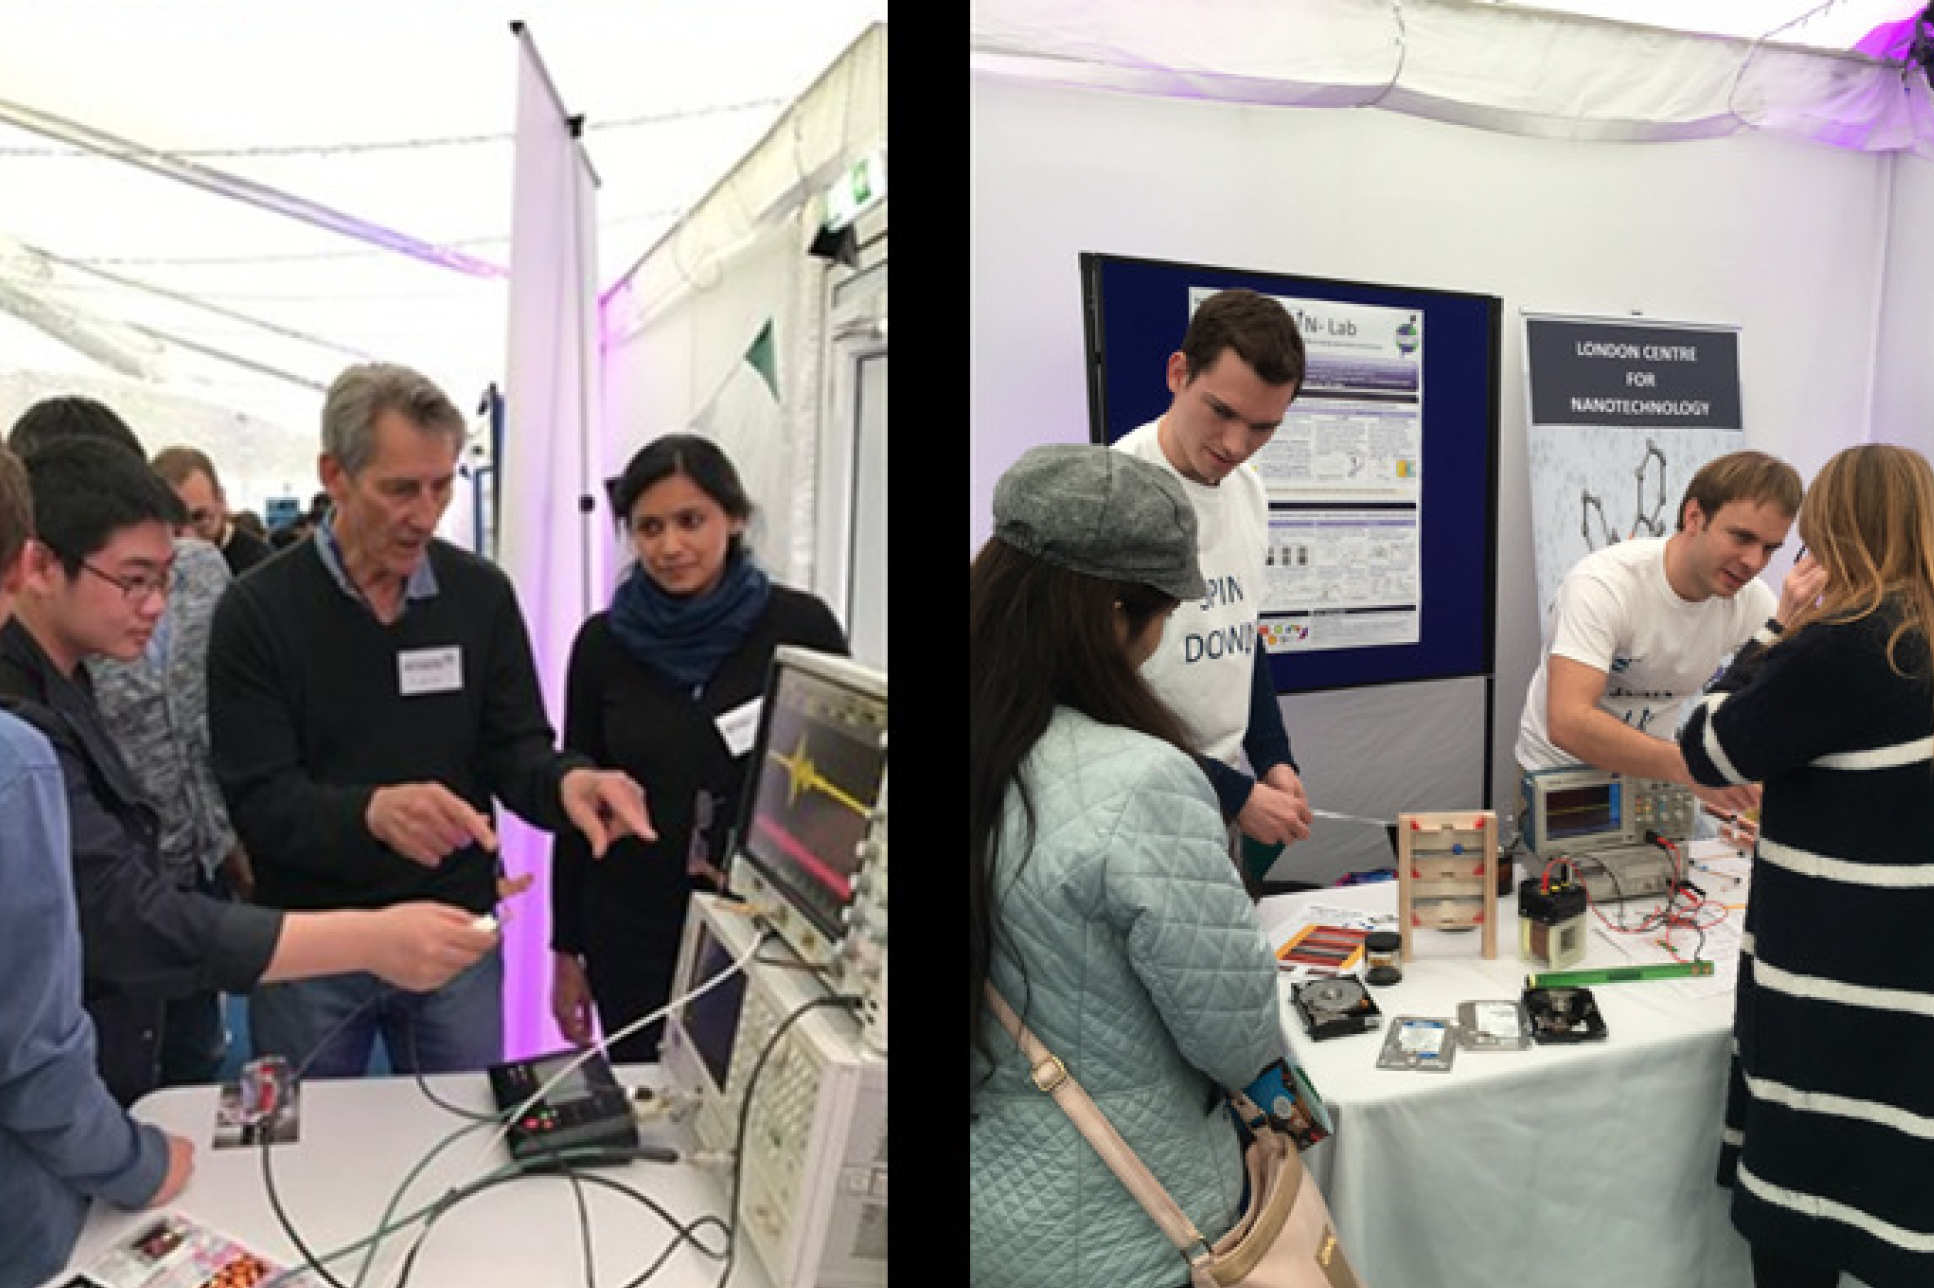 LCN researchers at the Imperial Festival, at the Amazing Masers (left) and SPIN-Lab (right) stands.